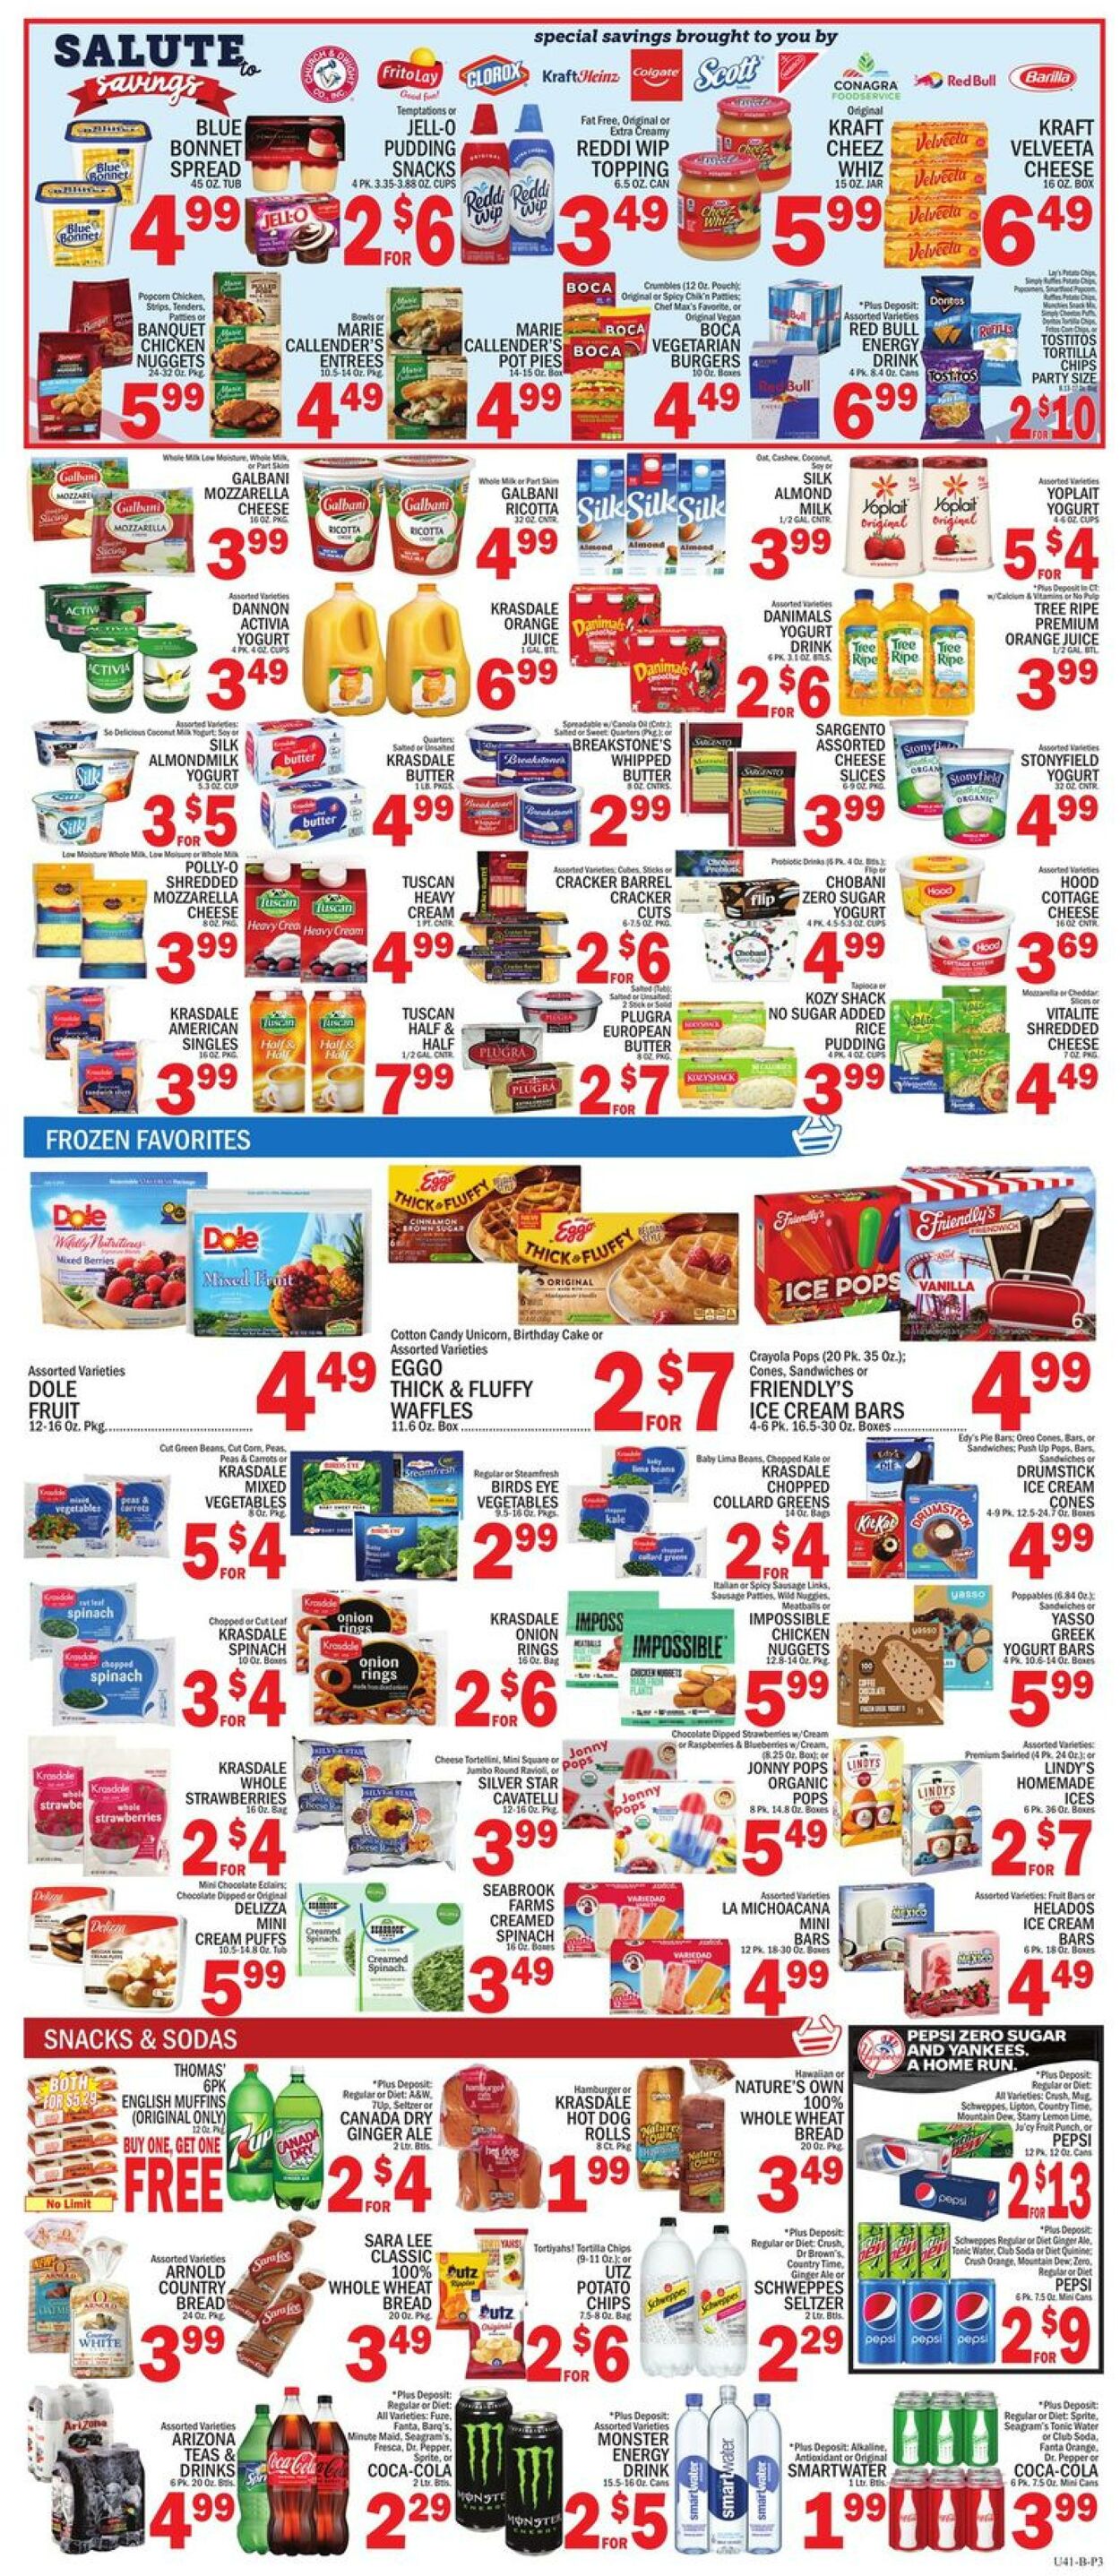 Weekly ad CTown 05/26/2023 - 06/01/2023